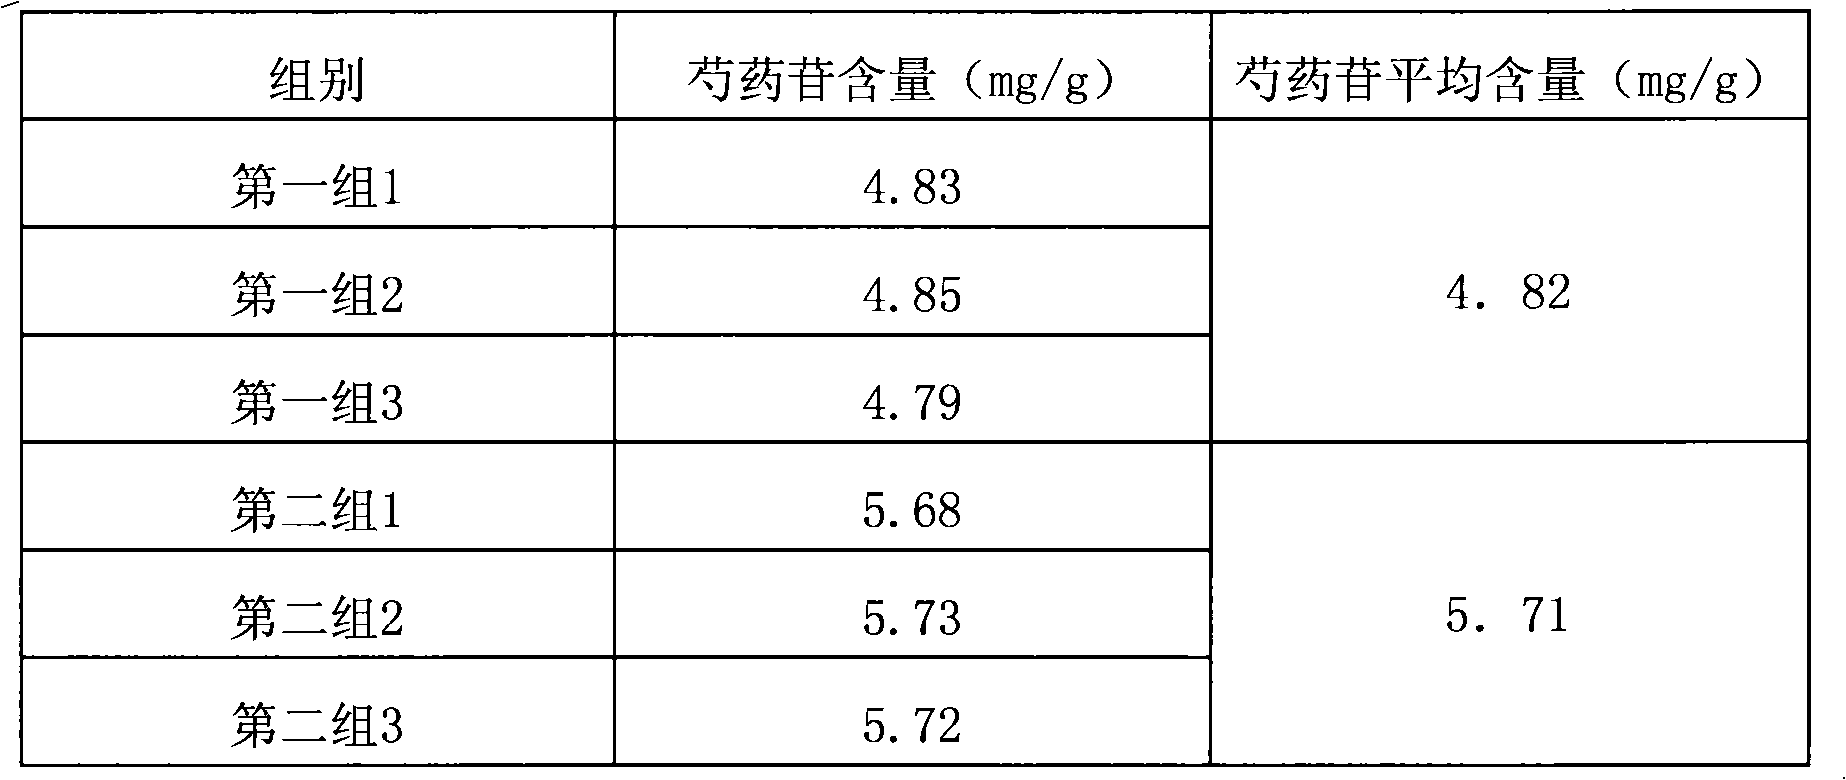 Traditional Chinese drop pills for treating cardiovascular and cerebrovascular diseases and preparation method thereof